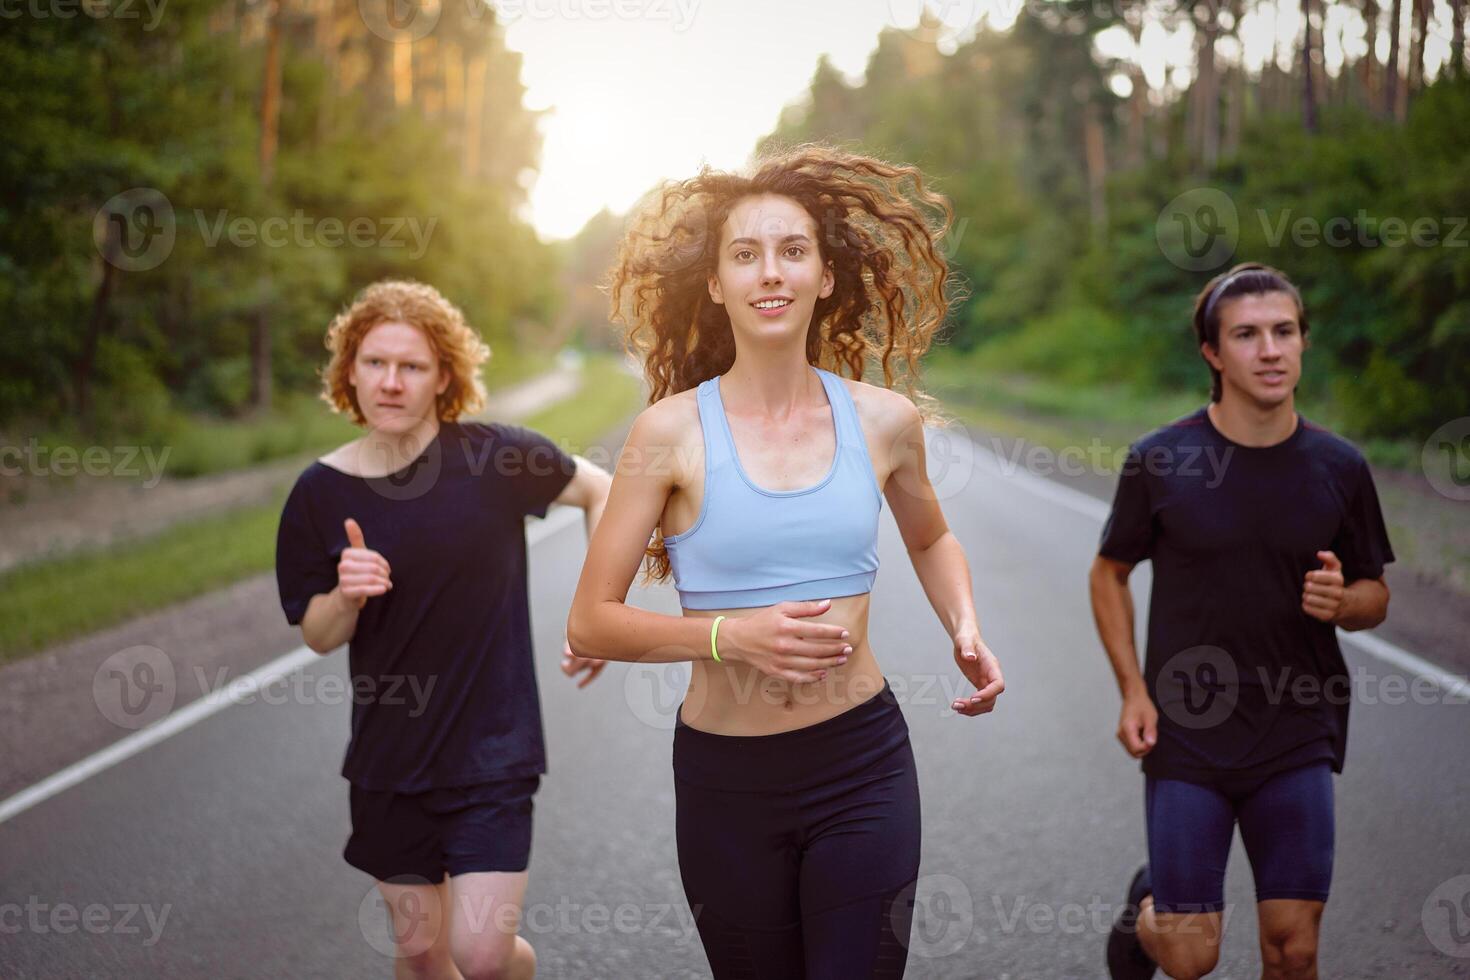 A group of three people athletes one girl and two men run on an asphalt road in a pine forest. photo